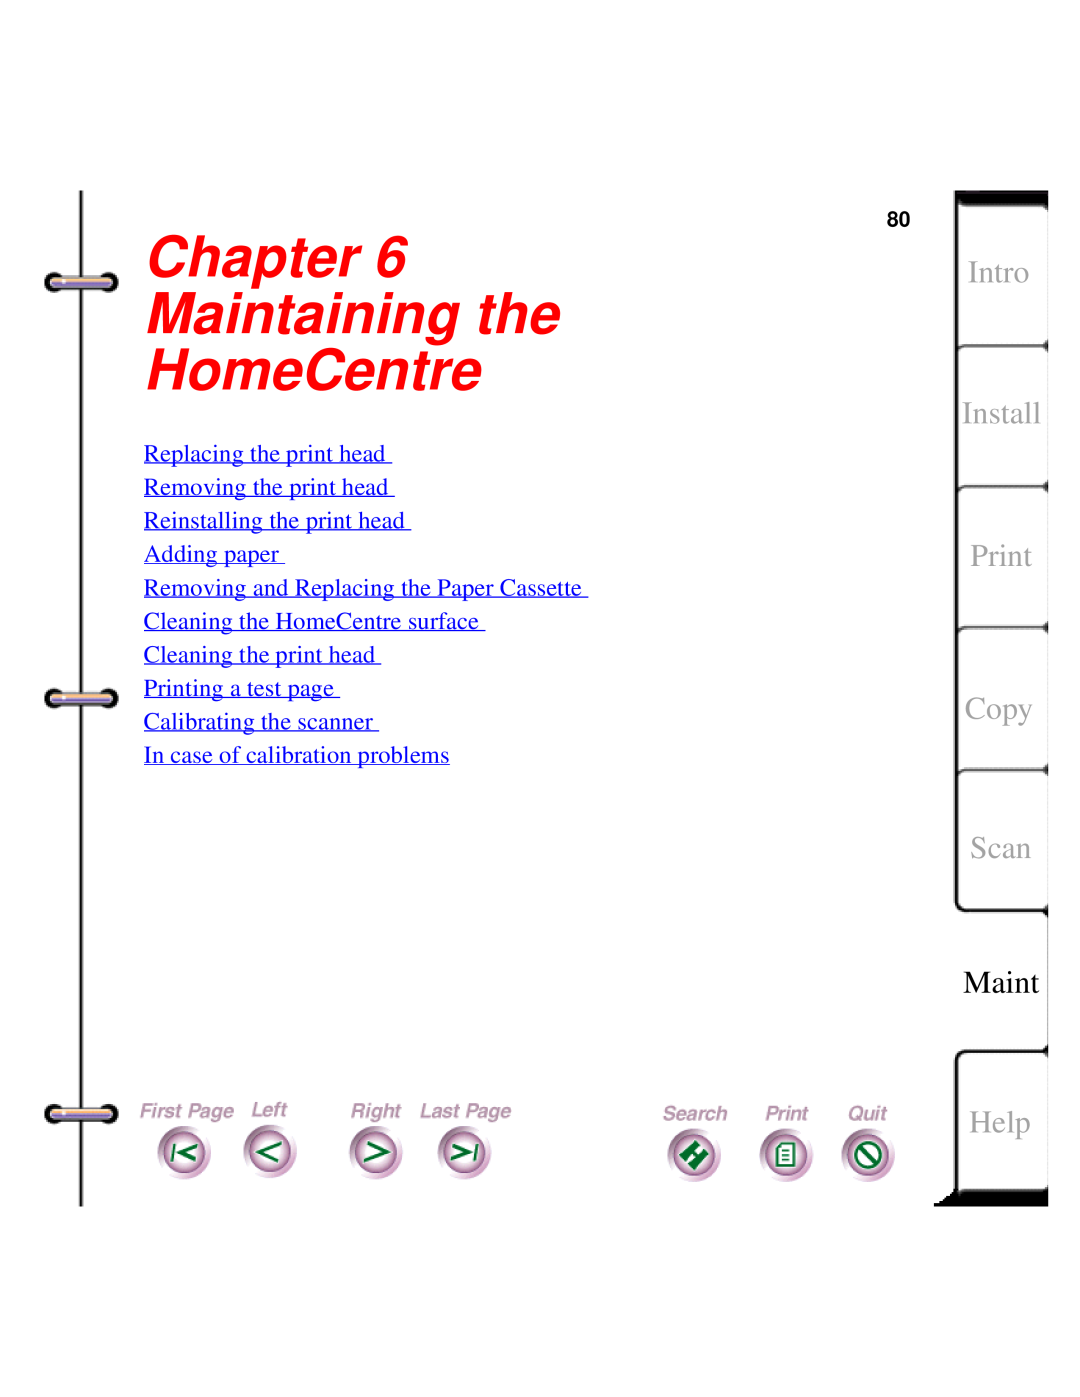 Xerox Document HomeCentre manual Chapter Maintaining the HomeCentre, Intro Install Print Copy Scan, Help 